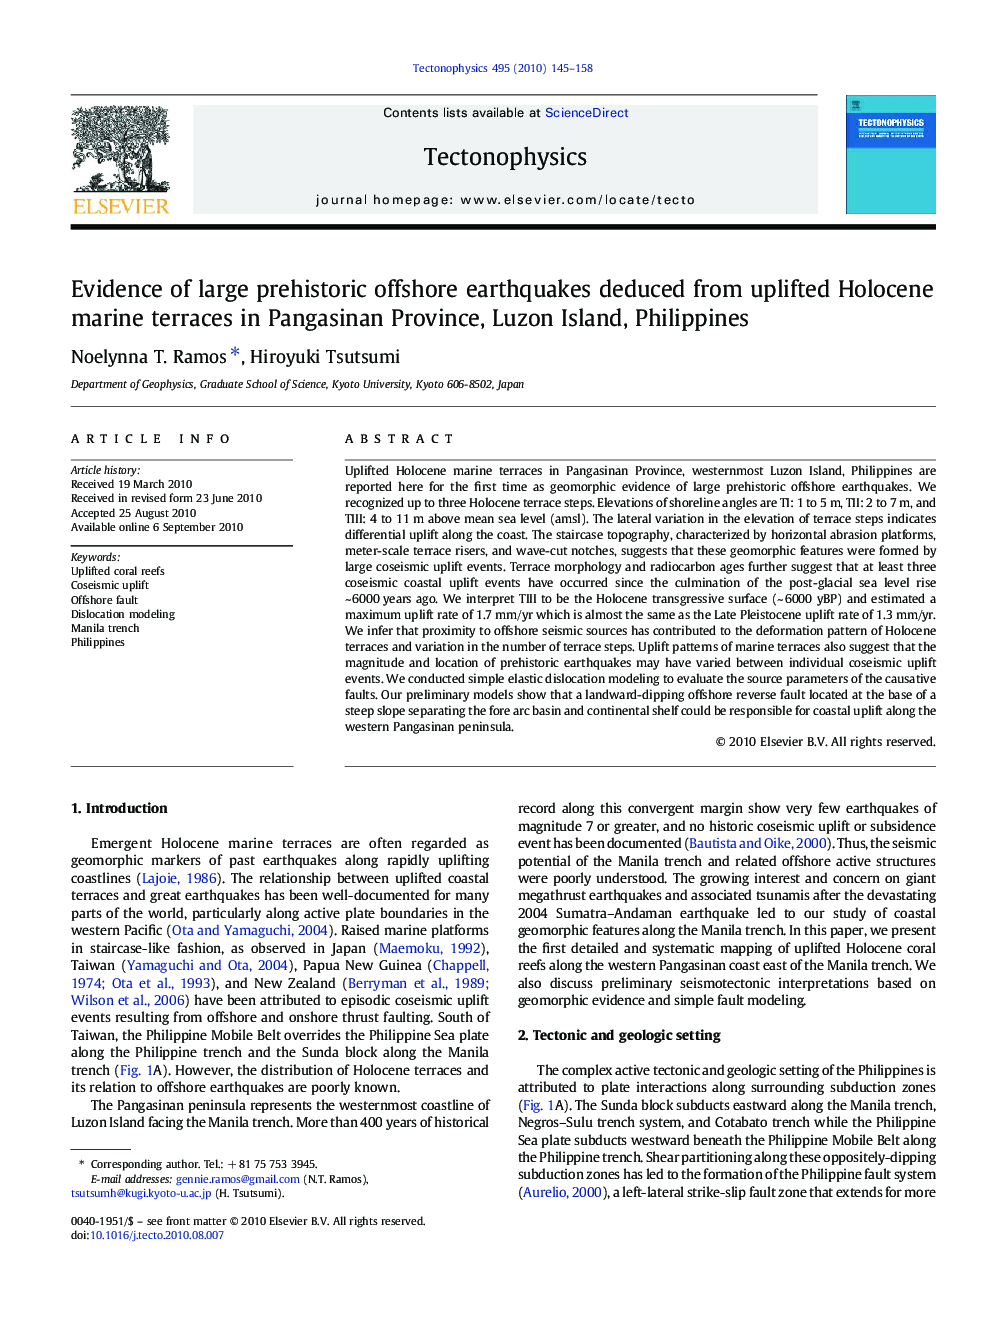 Evidence of large prehistoric offshore earthquakes deduced from uplifted Holocene marine terraces in Pangasinan Province, Luzon Island, Philippines